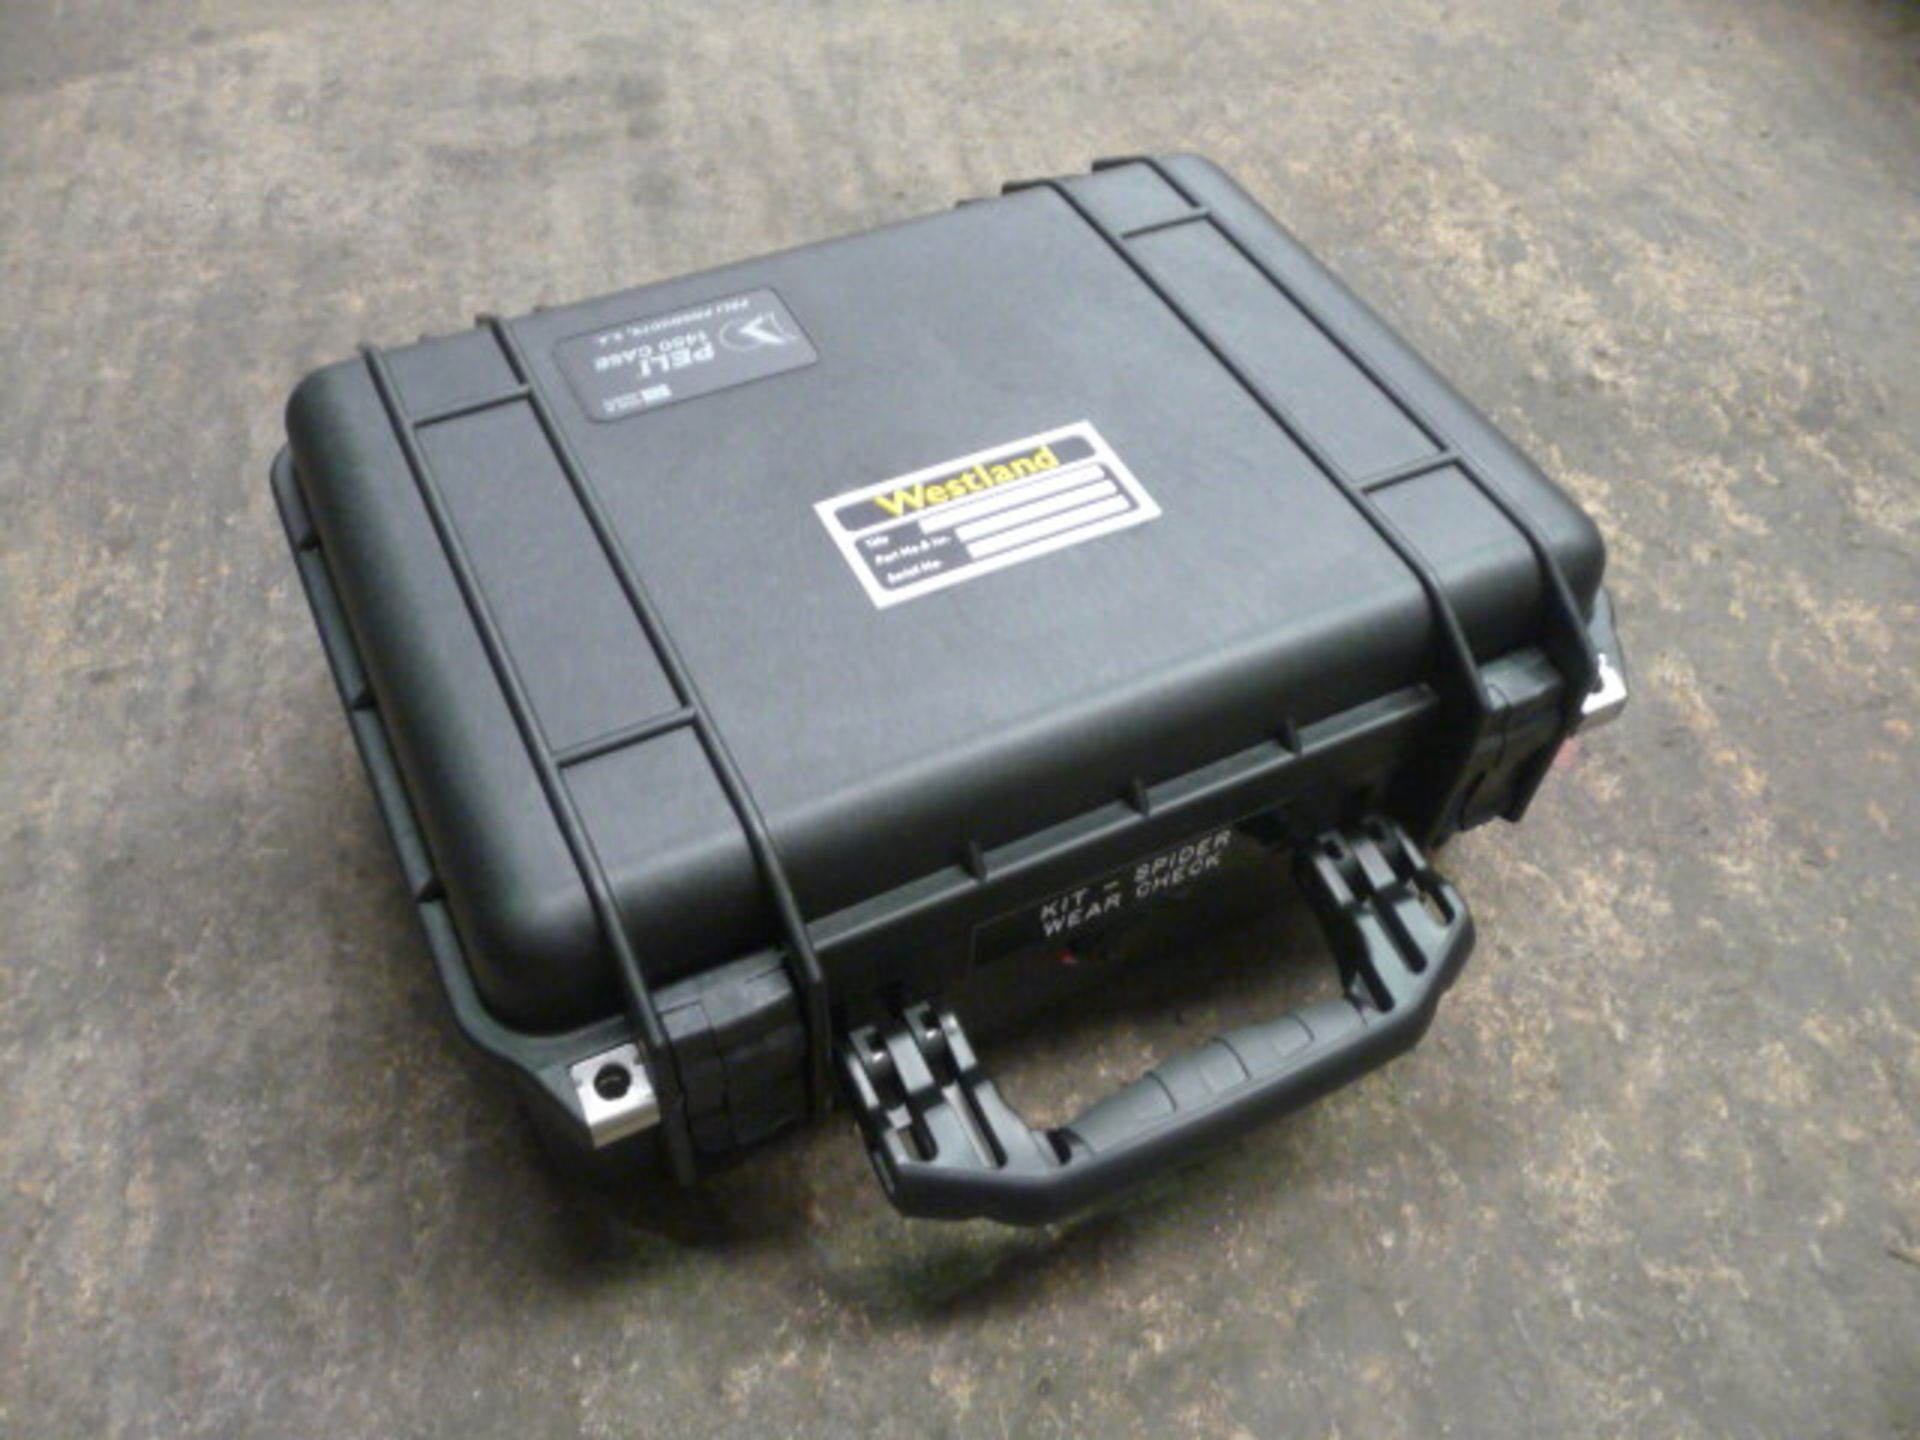 Heavy Duty Peli Case 1450 containing a Spider Wear Check Kit